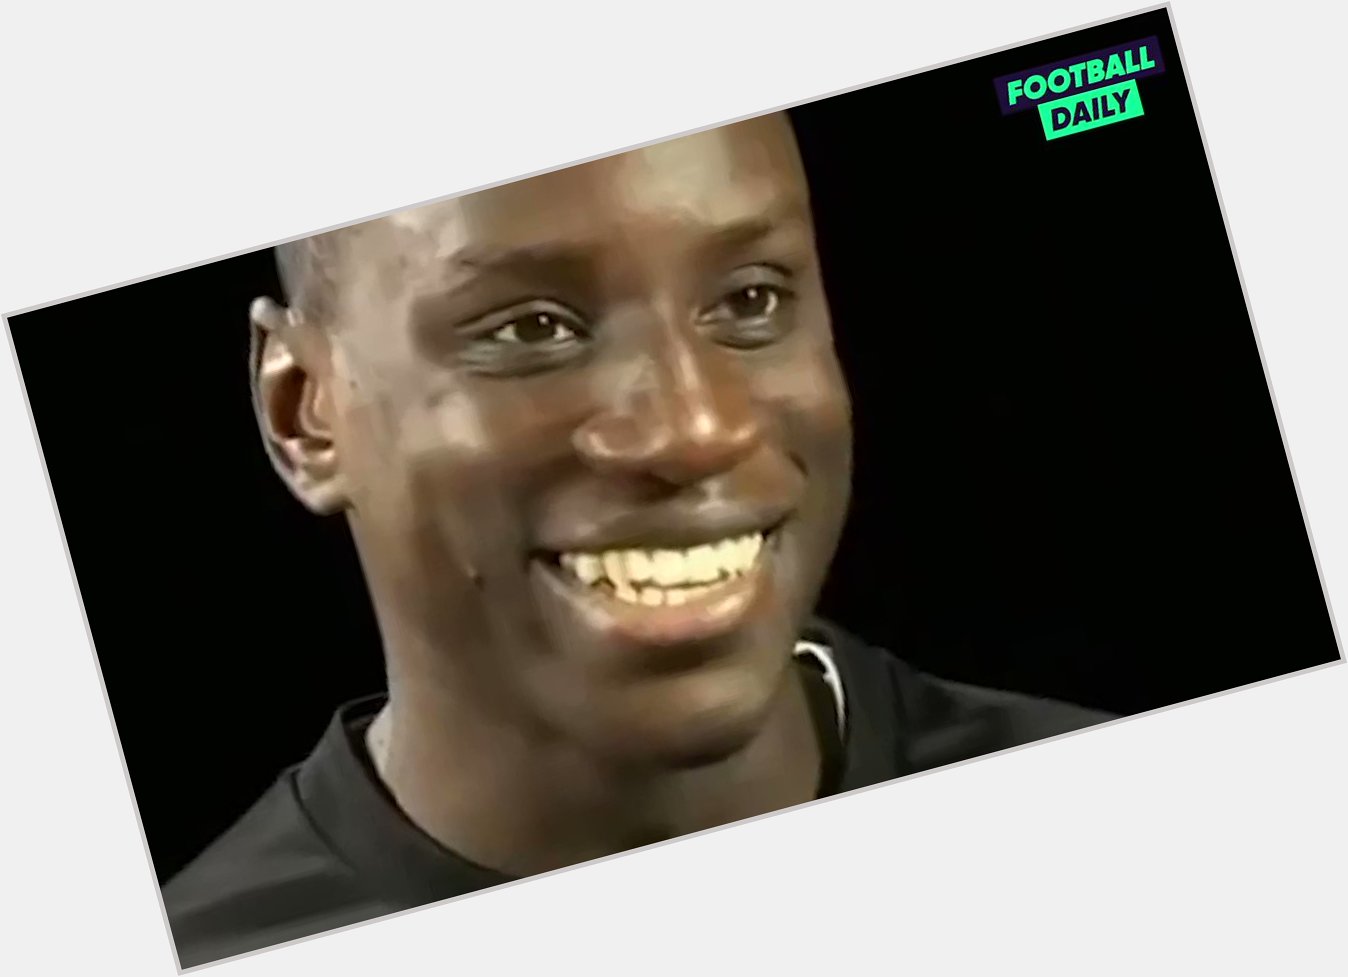 When Demba Ba gave us one of the best interviews ever 

Happy birthday  